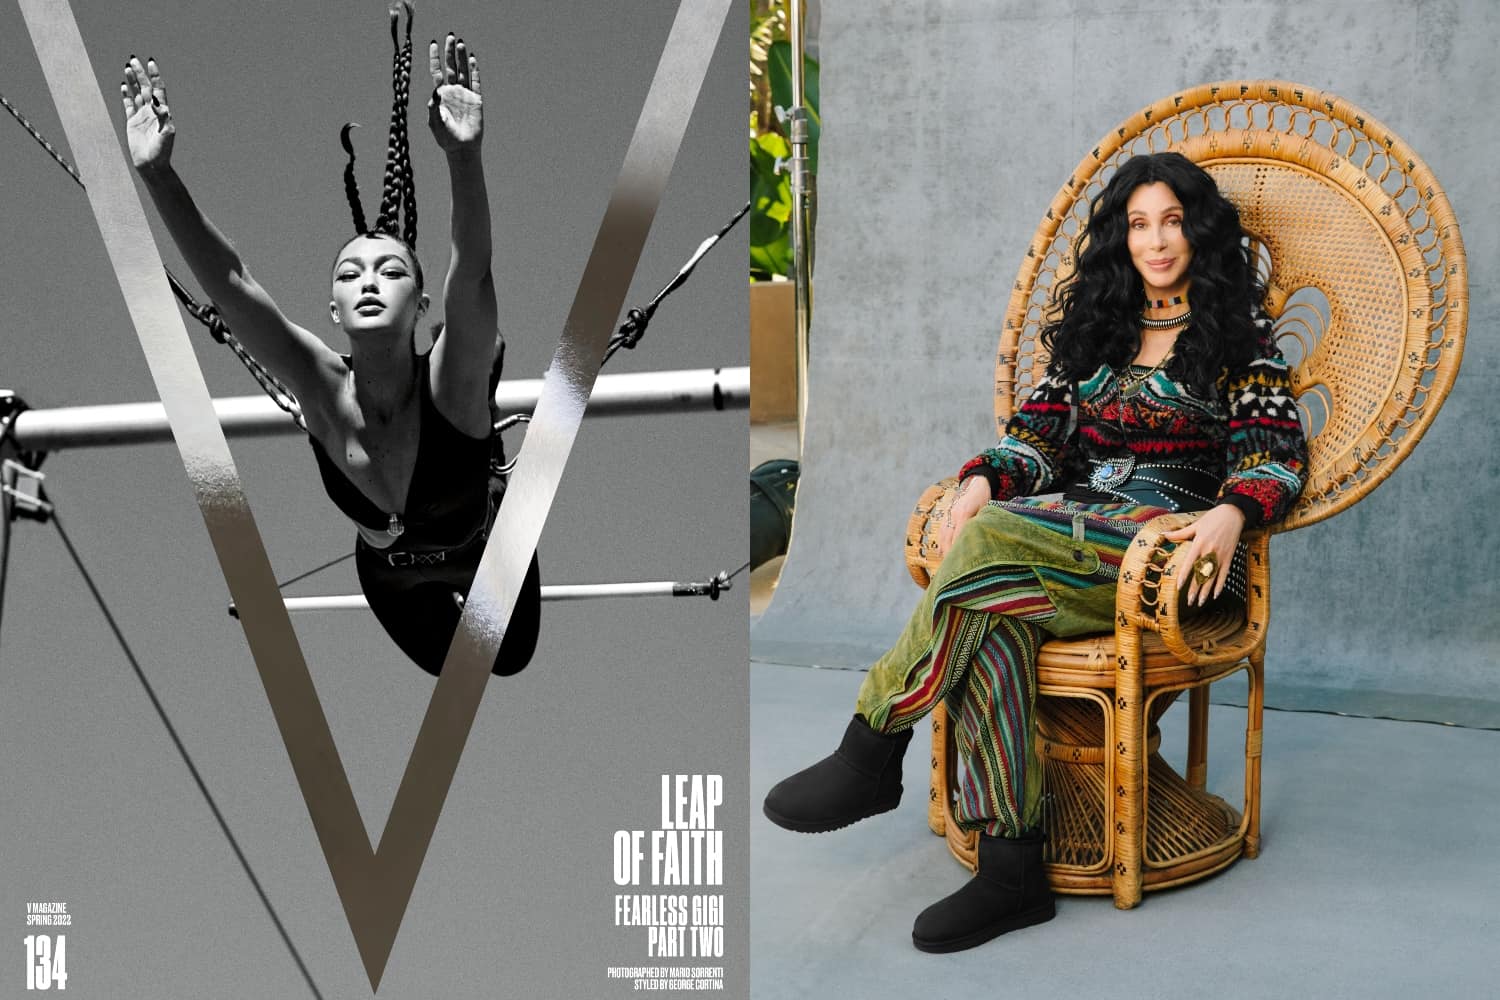 Daily News: Armani Cancels January Shows, Gigi Hadid Soars For V Magazine,  Cher Fronts Two (!) Major New Campaigns